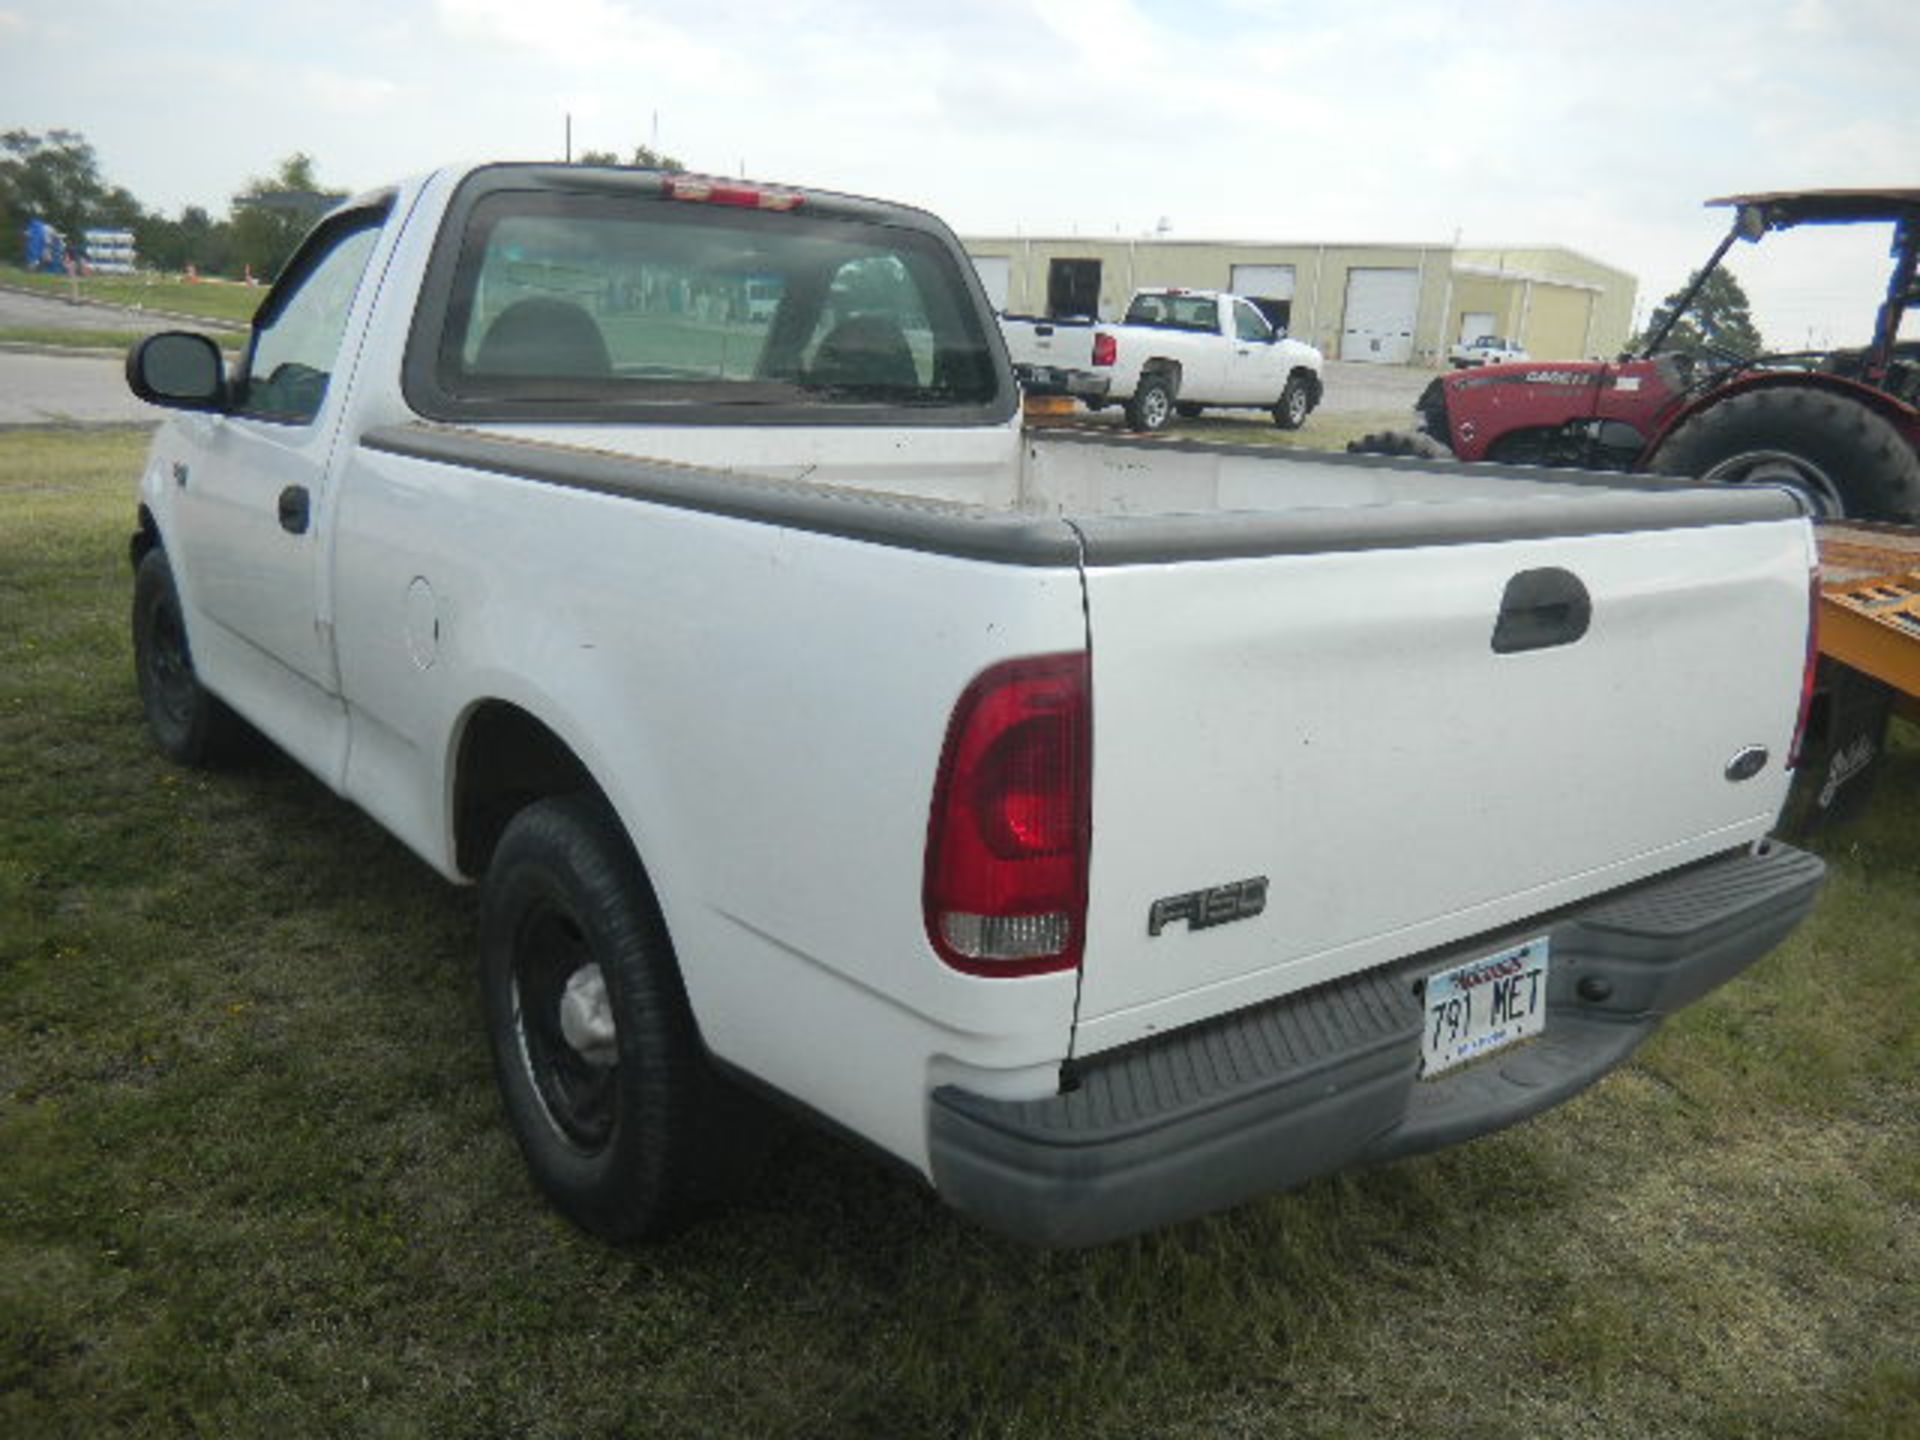 2003 Ford F150 XL Pickup - Asset I.D. #475 - Last of Vin (CA90379) - Animal Control Vehicle - Image 3 of 7